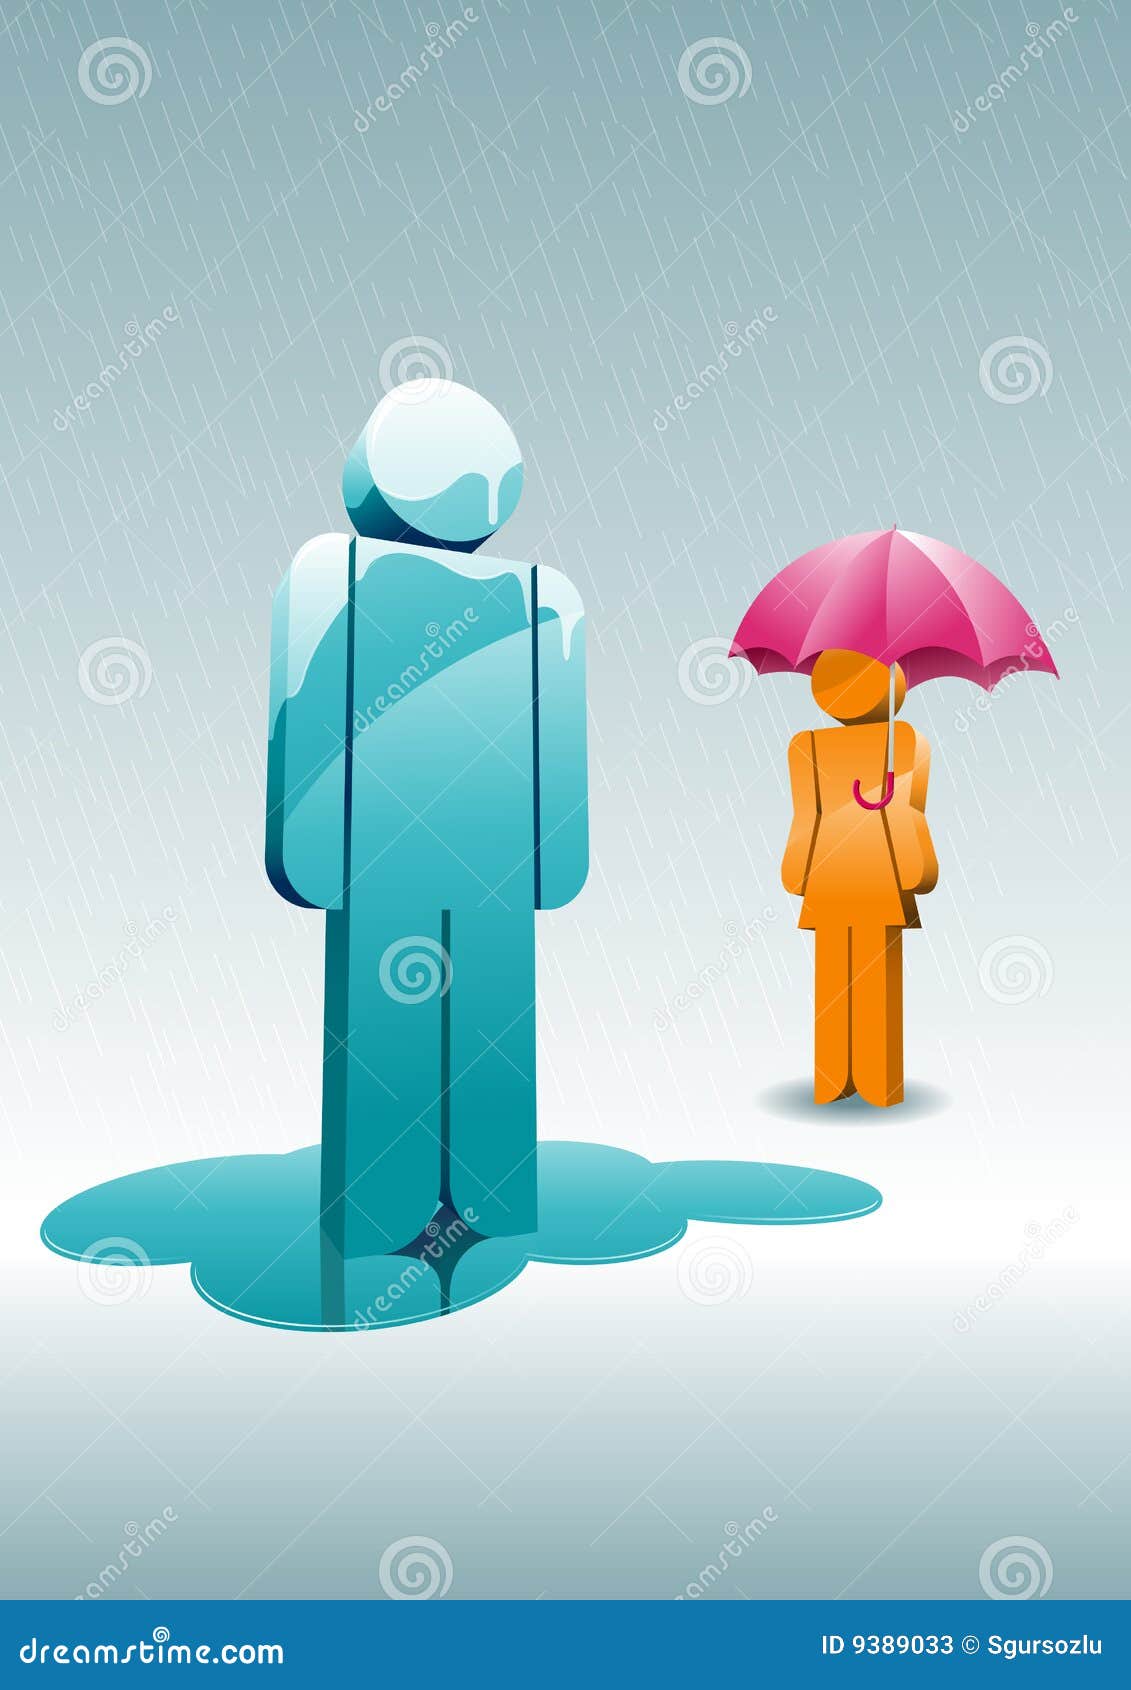 434,497 Rainy Day Images, Stock Photos, 3D objects, & Vectors